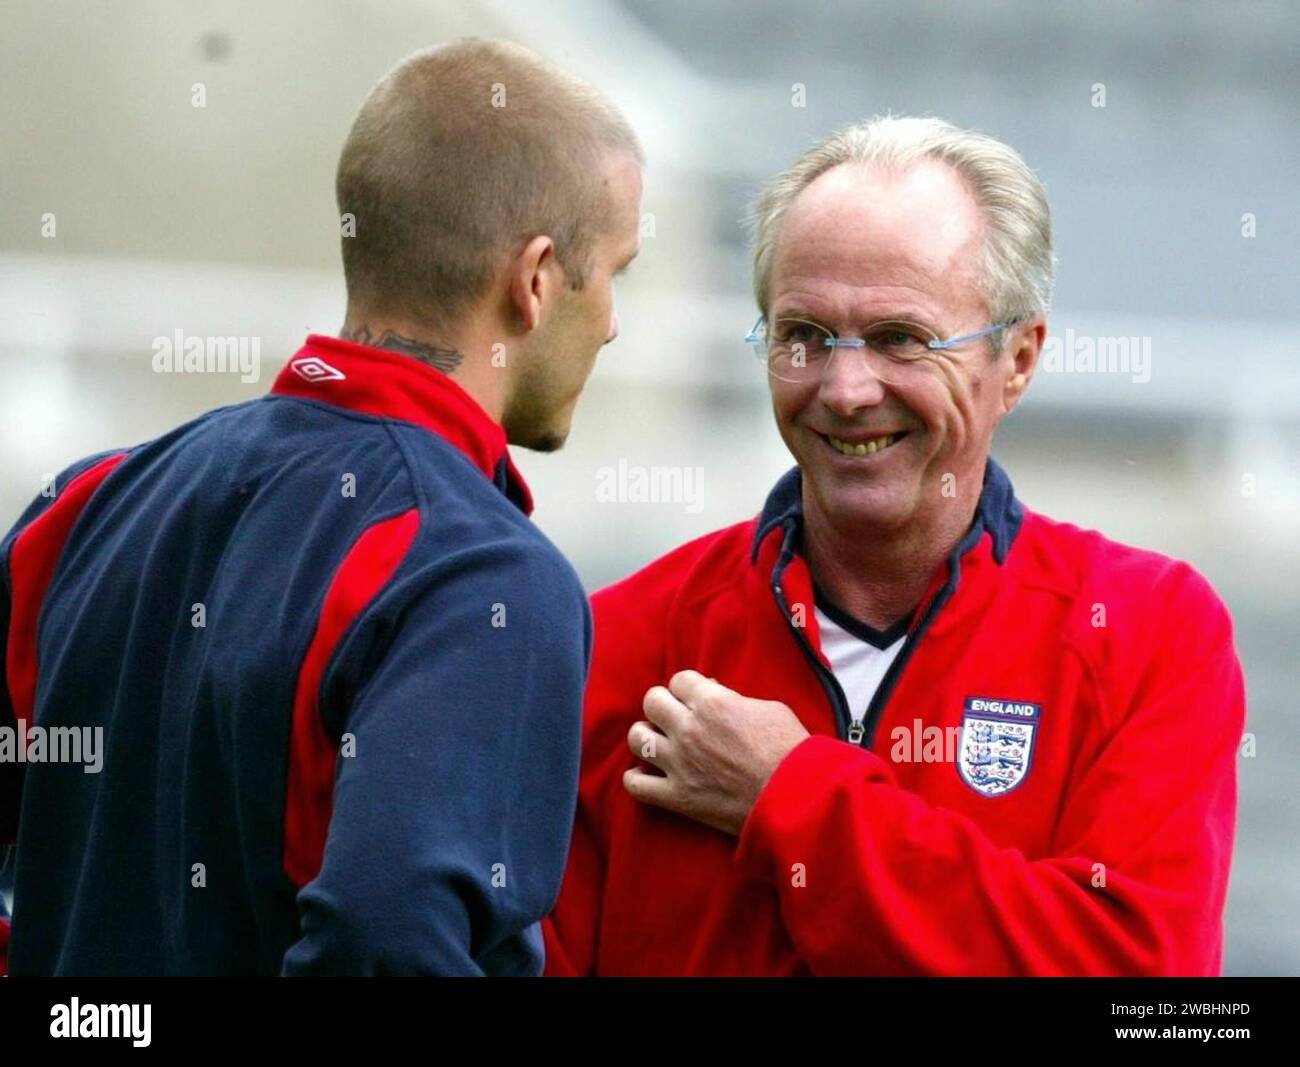 File photo dated 17/08/04 of Sven-Goran Eriksson and David Beckham. Sven-Goran Eriksson has been diagnosed with terminal cancer and in a “best case” scenario has around a year left to live, the former England manager has revealed. Eriksson, who managed England for five years before leaving after the 2006 World Cup, stood down from his most recent role as sporting director at Swedish club Karlstad 11 months ago due to health issues. Issue date: Thursday January 11, 2024. Stock Photo